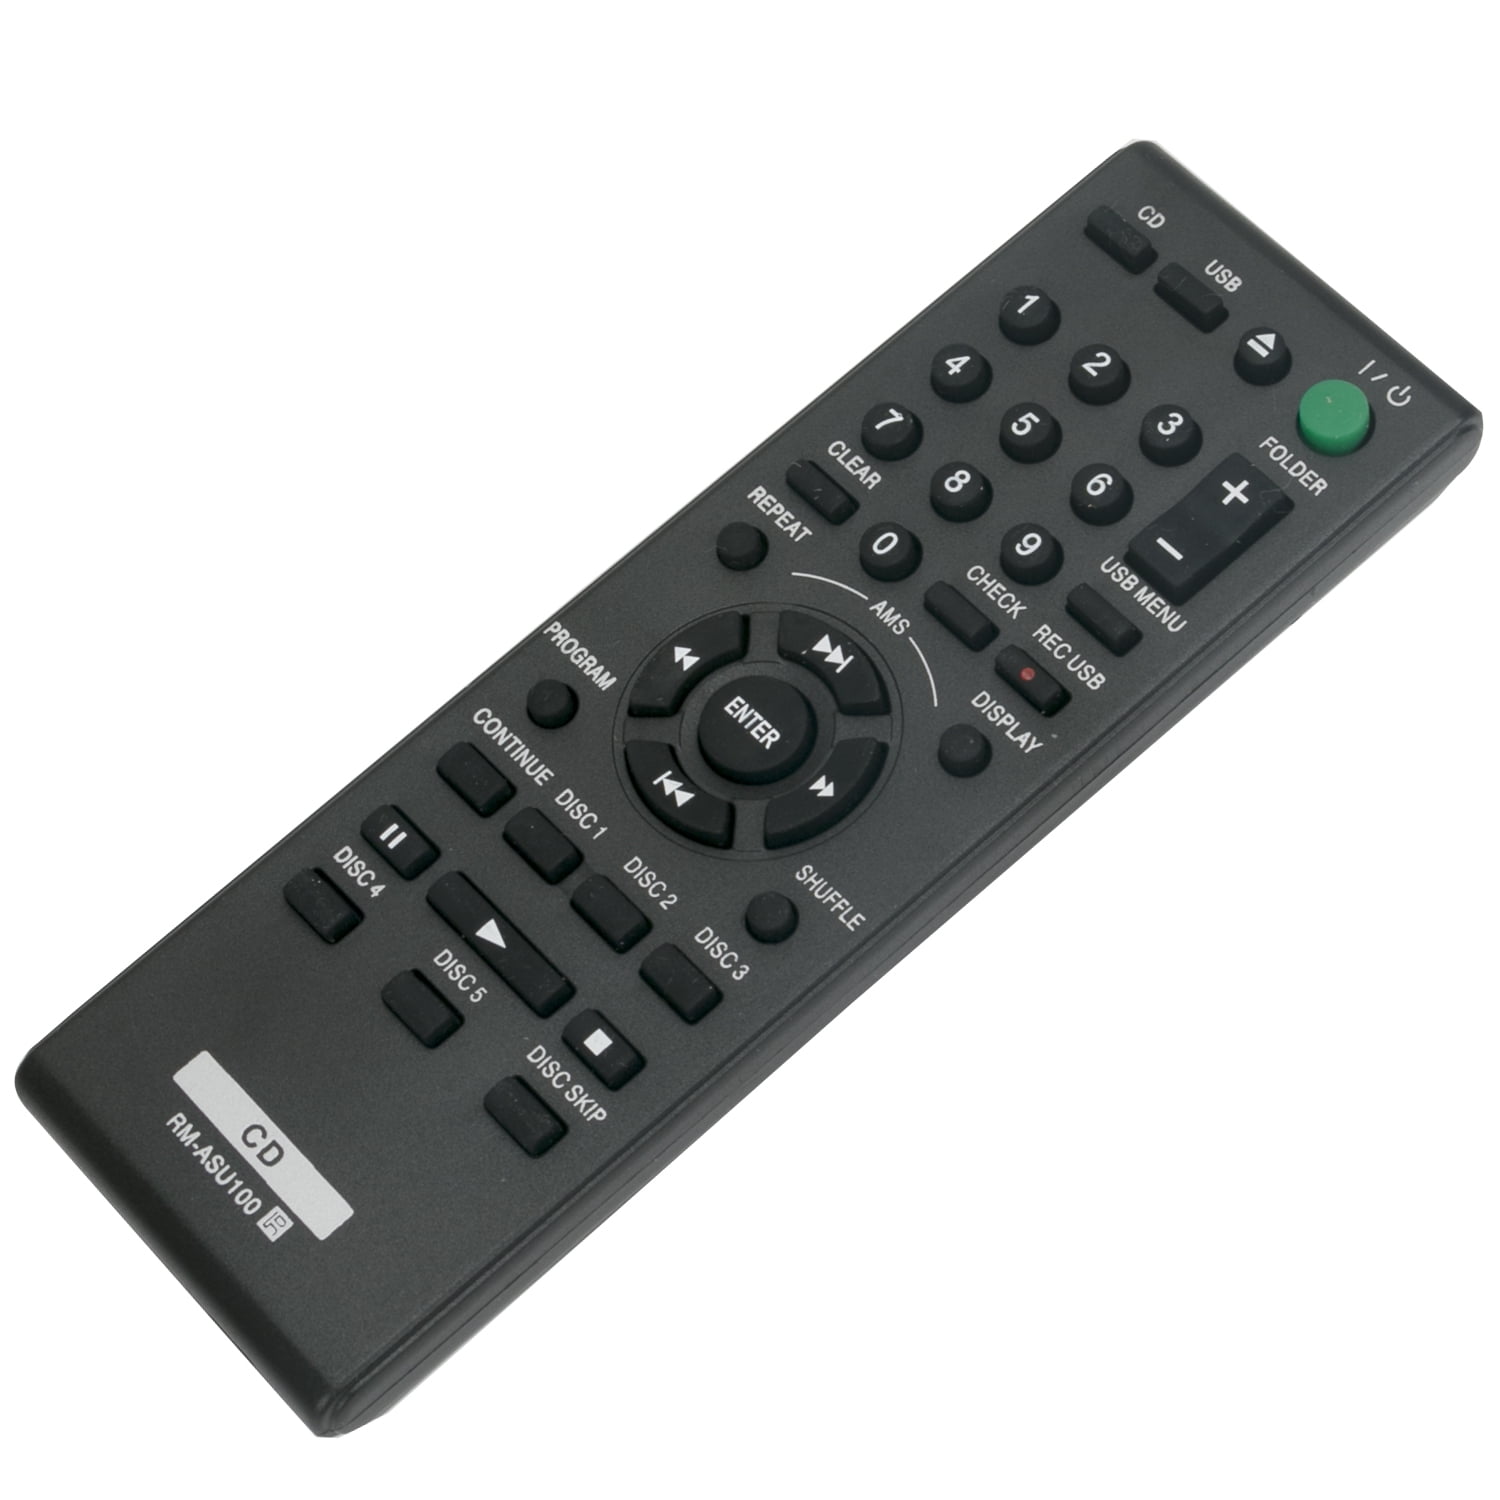 New RM-ASU100 Replaced Remote Control fit for Sony 5-Disc CD